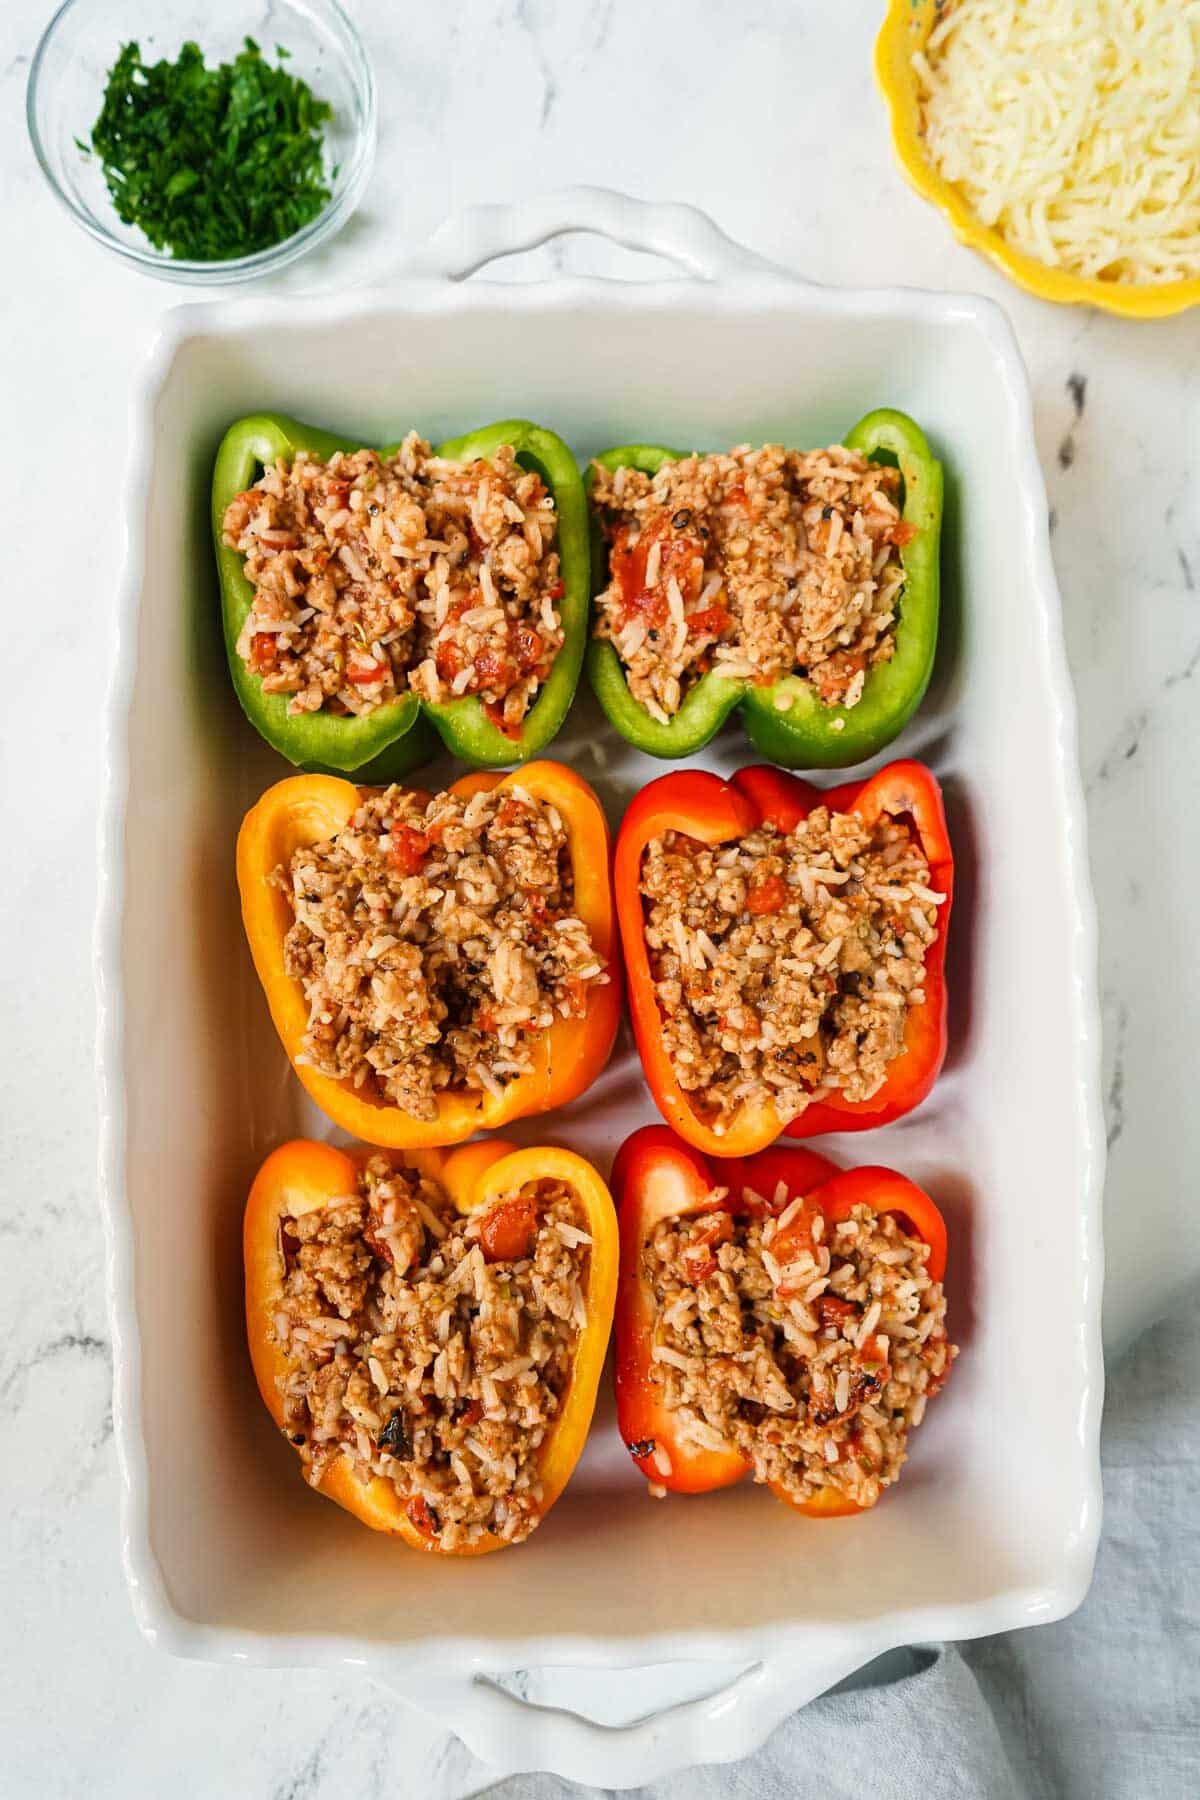 Bell peppers that are filled with stuffing in a white casserole dish before being cooked.